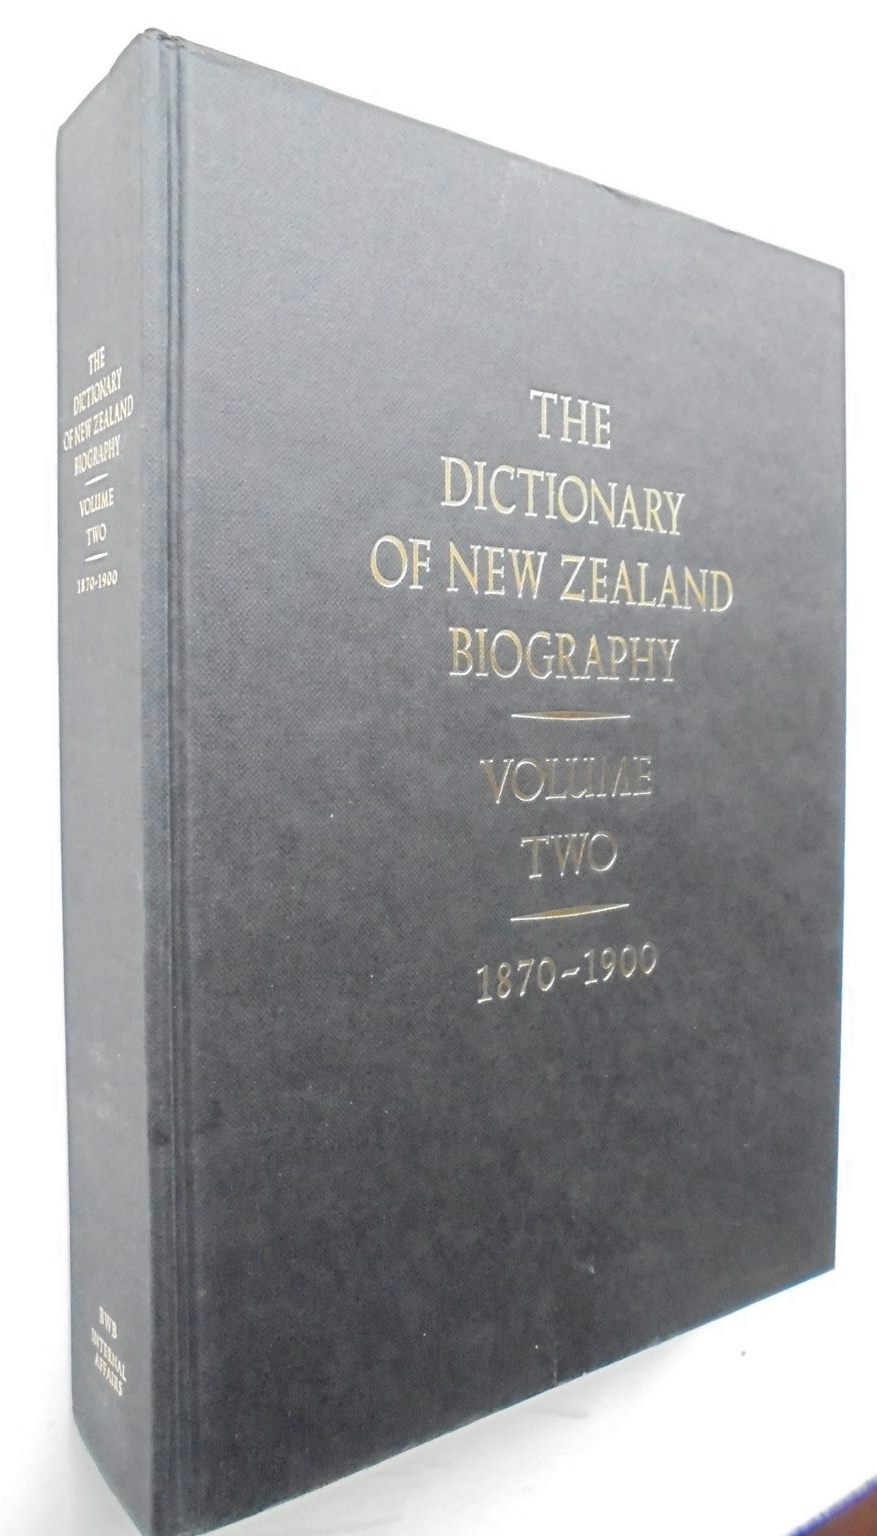 The Dictionary of New Zealand Biography. Vol 1 and Vol 2.